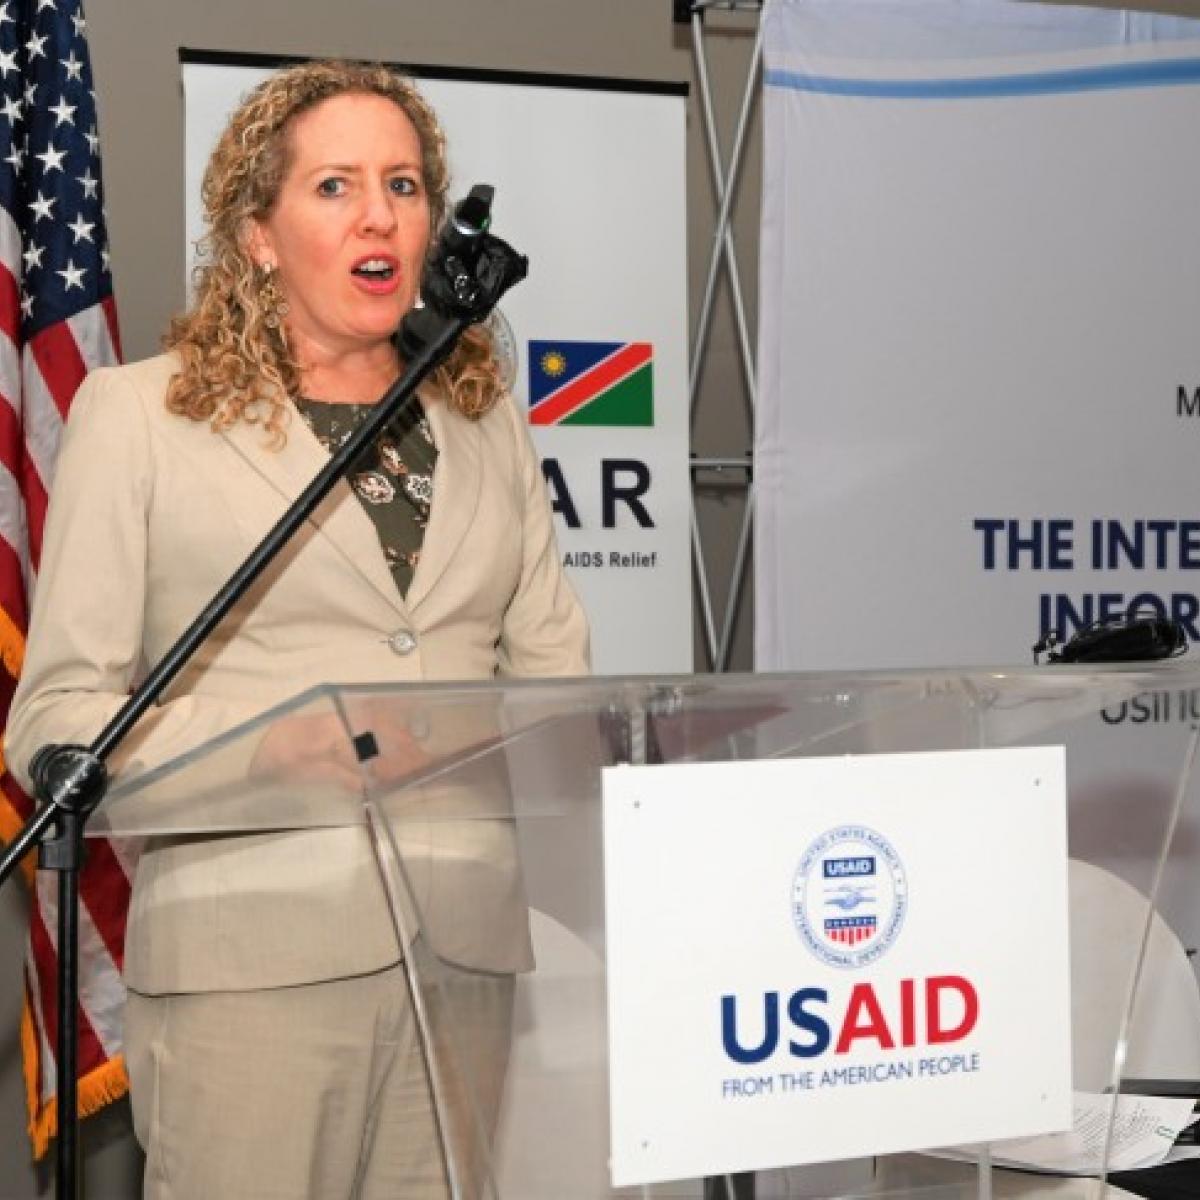 Jessica Long, U.S. Chargé d’Affaires of the U.S. Embassy in Namibia